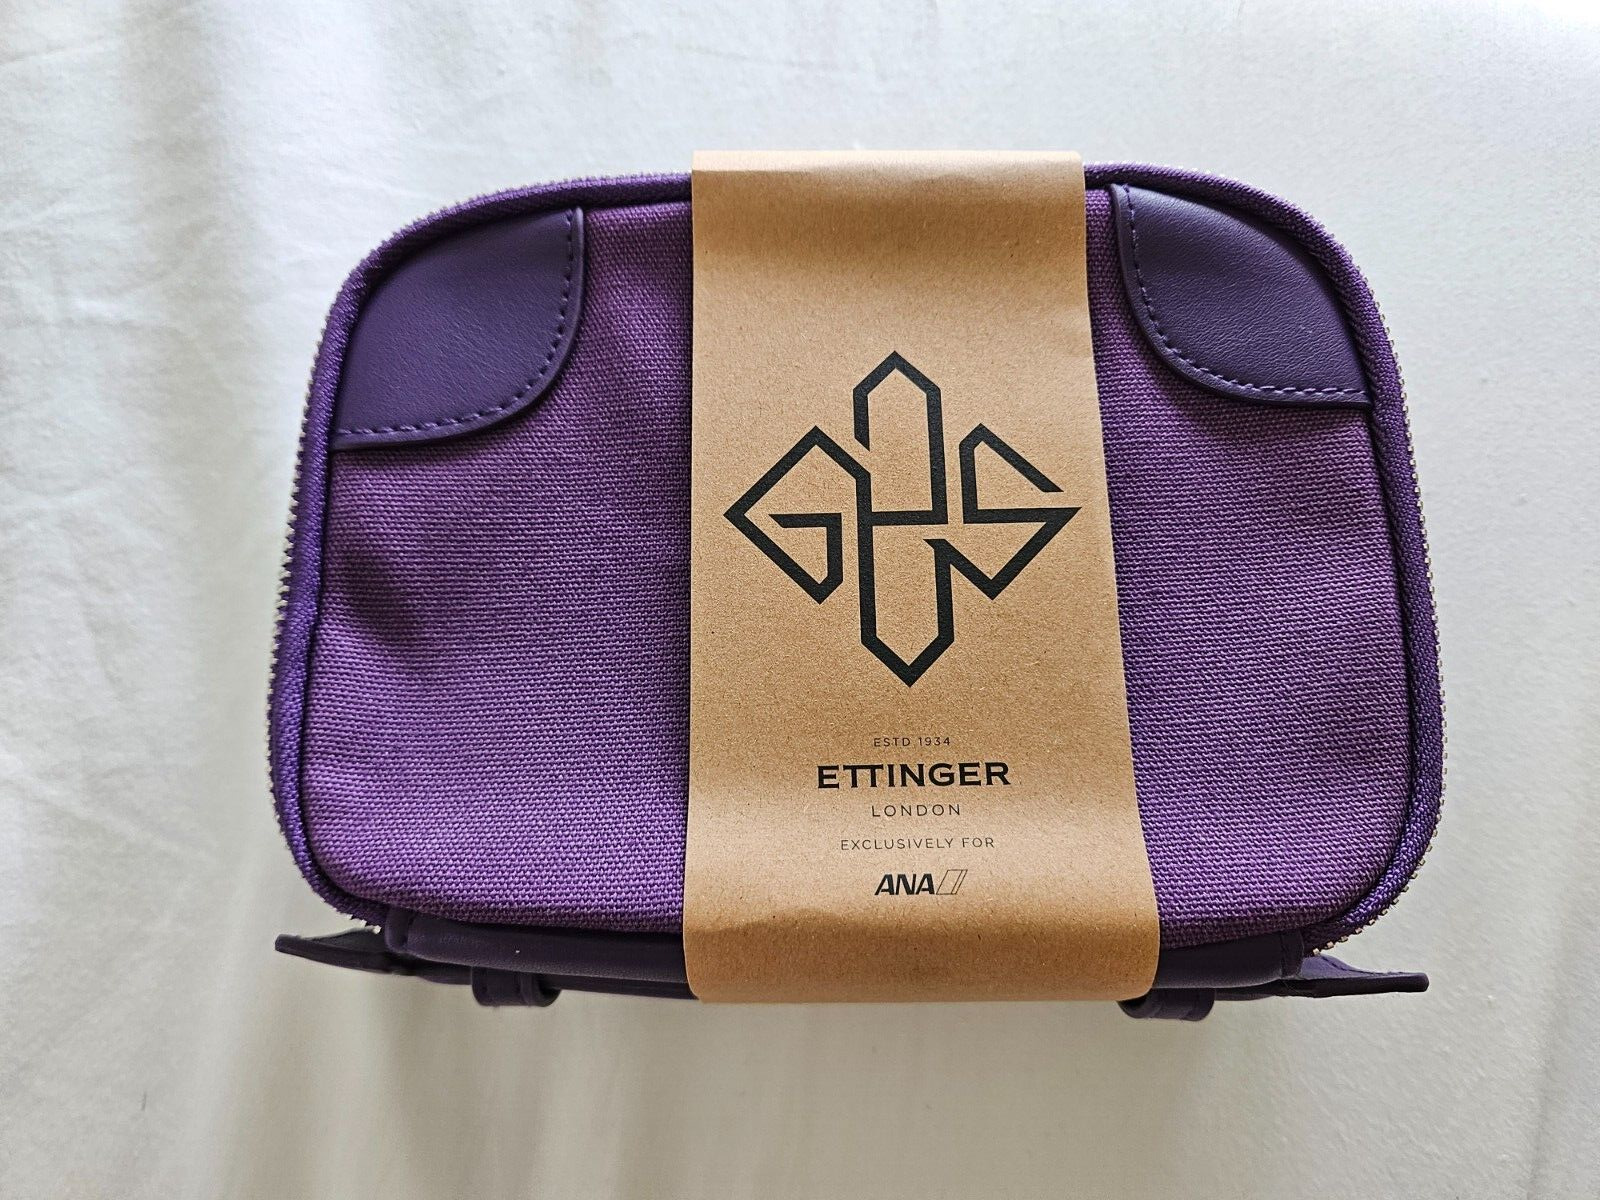 New ANA All Nippon Airways First Class Amenity Kit by Ettinger London